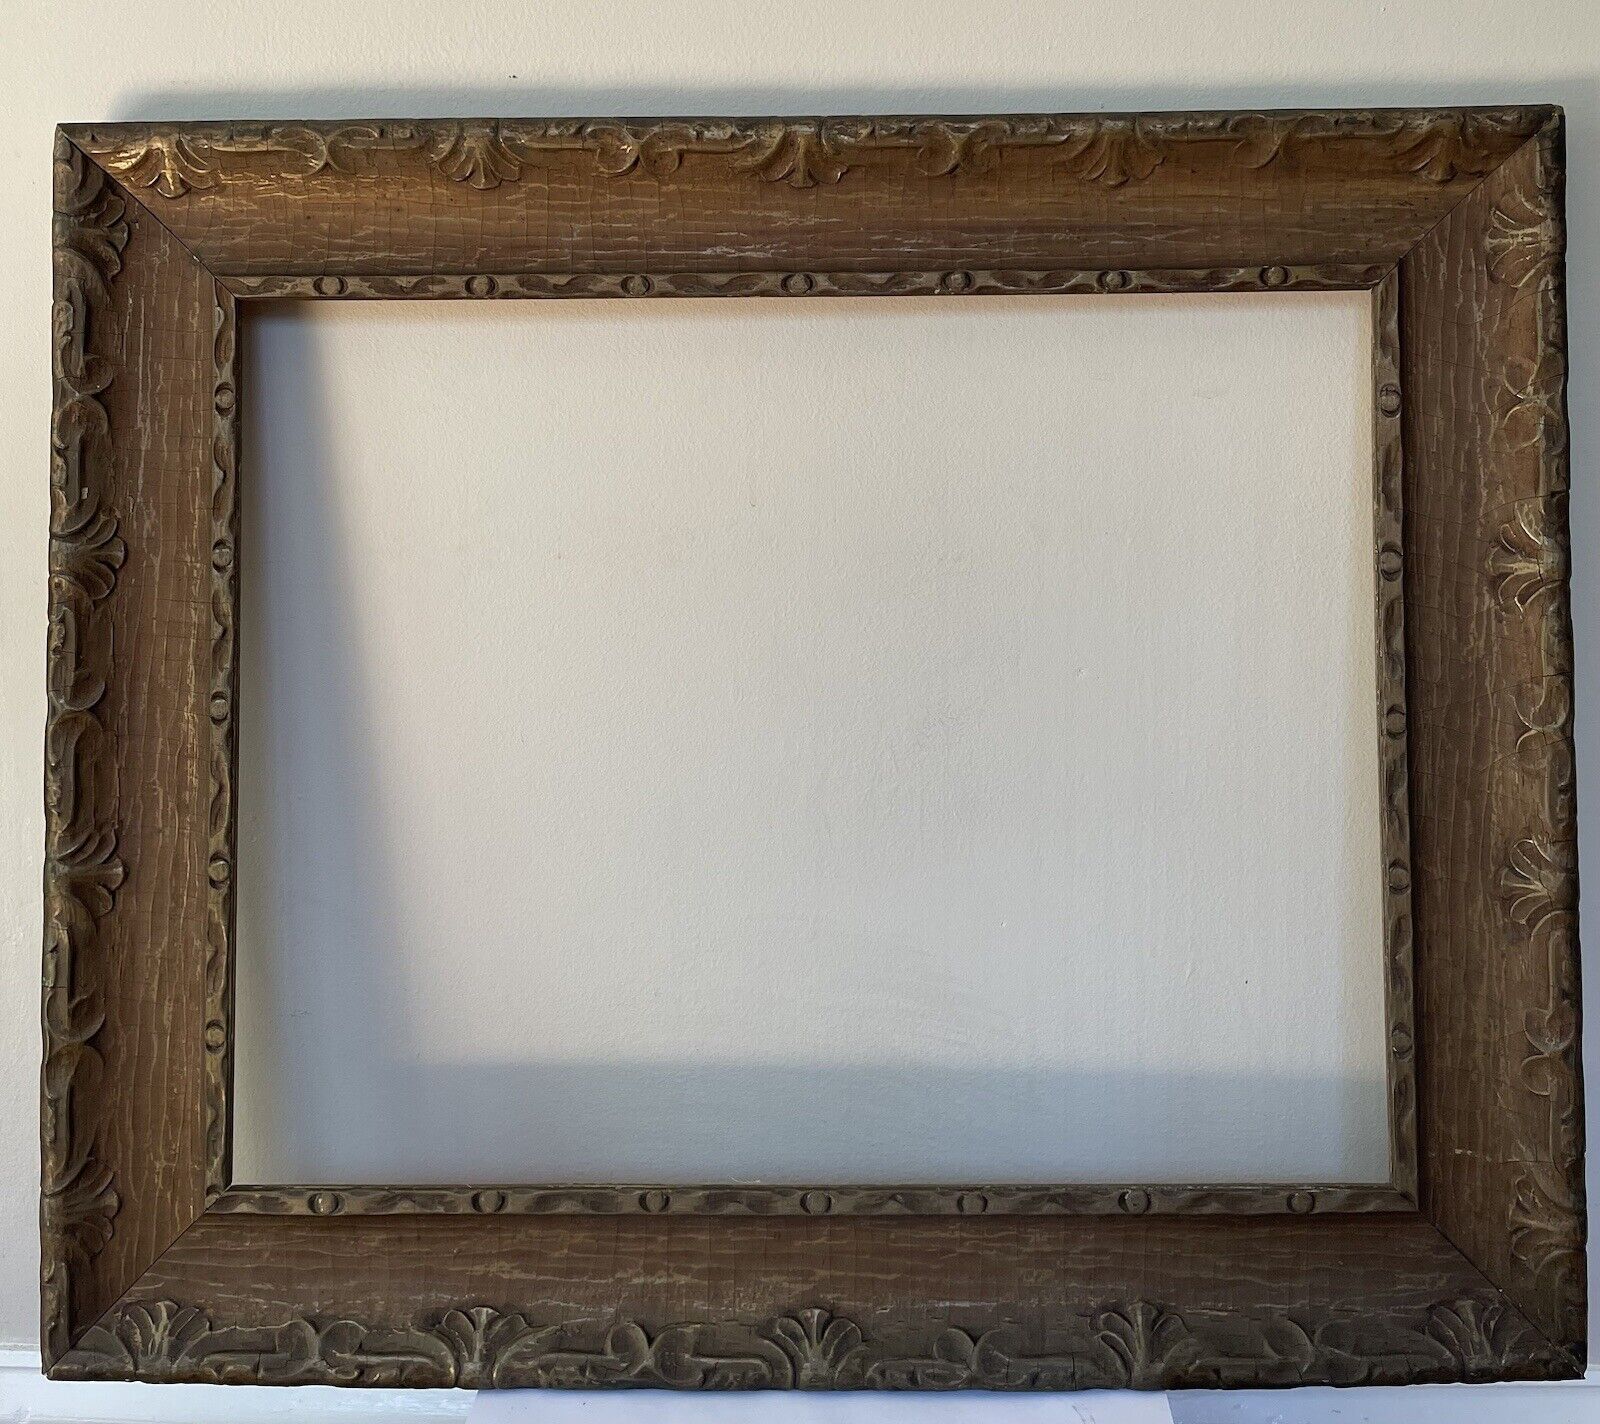 Rare Antique Large Wooden Art Frame Gilded & Ornate 25”Lx20.5”Hx1”W-Brown